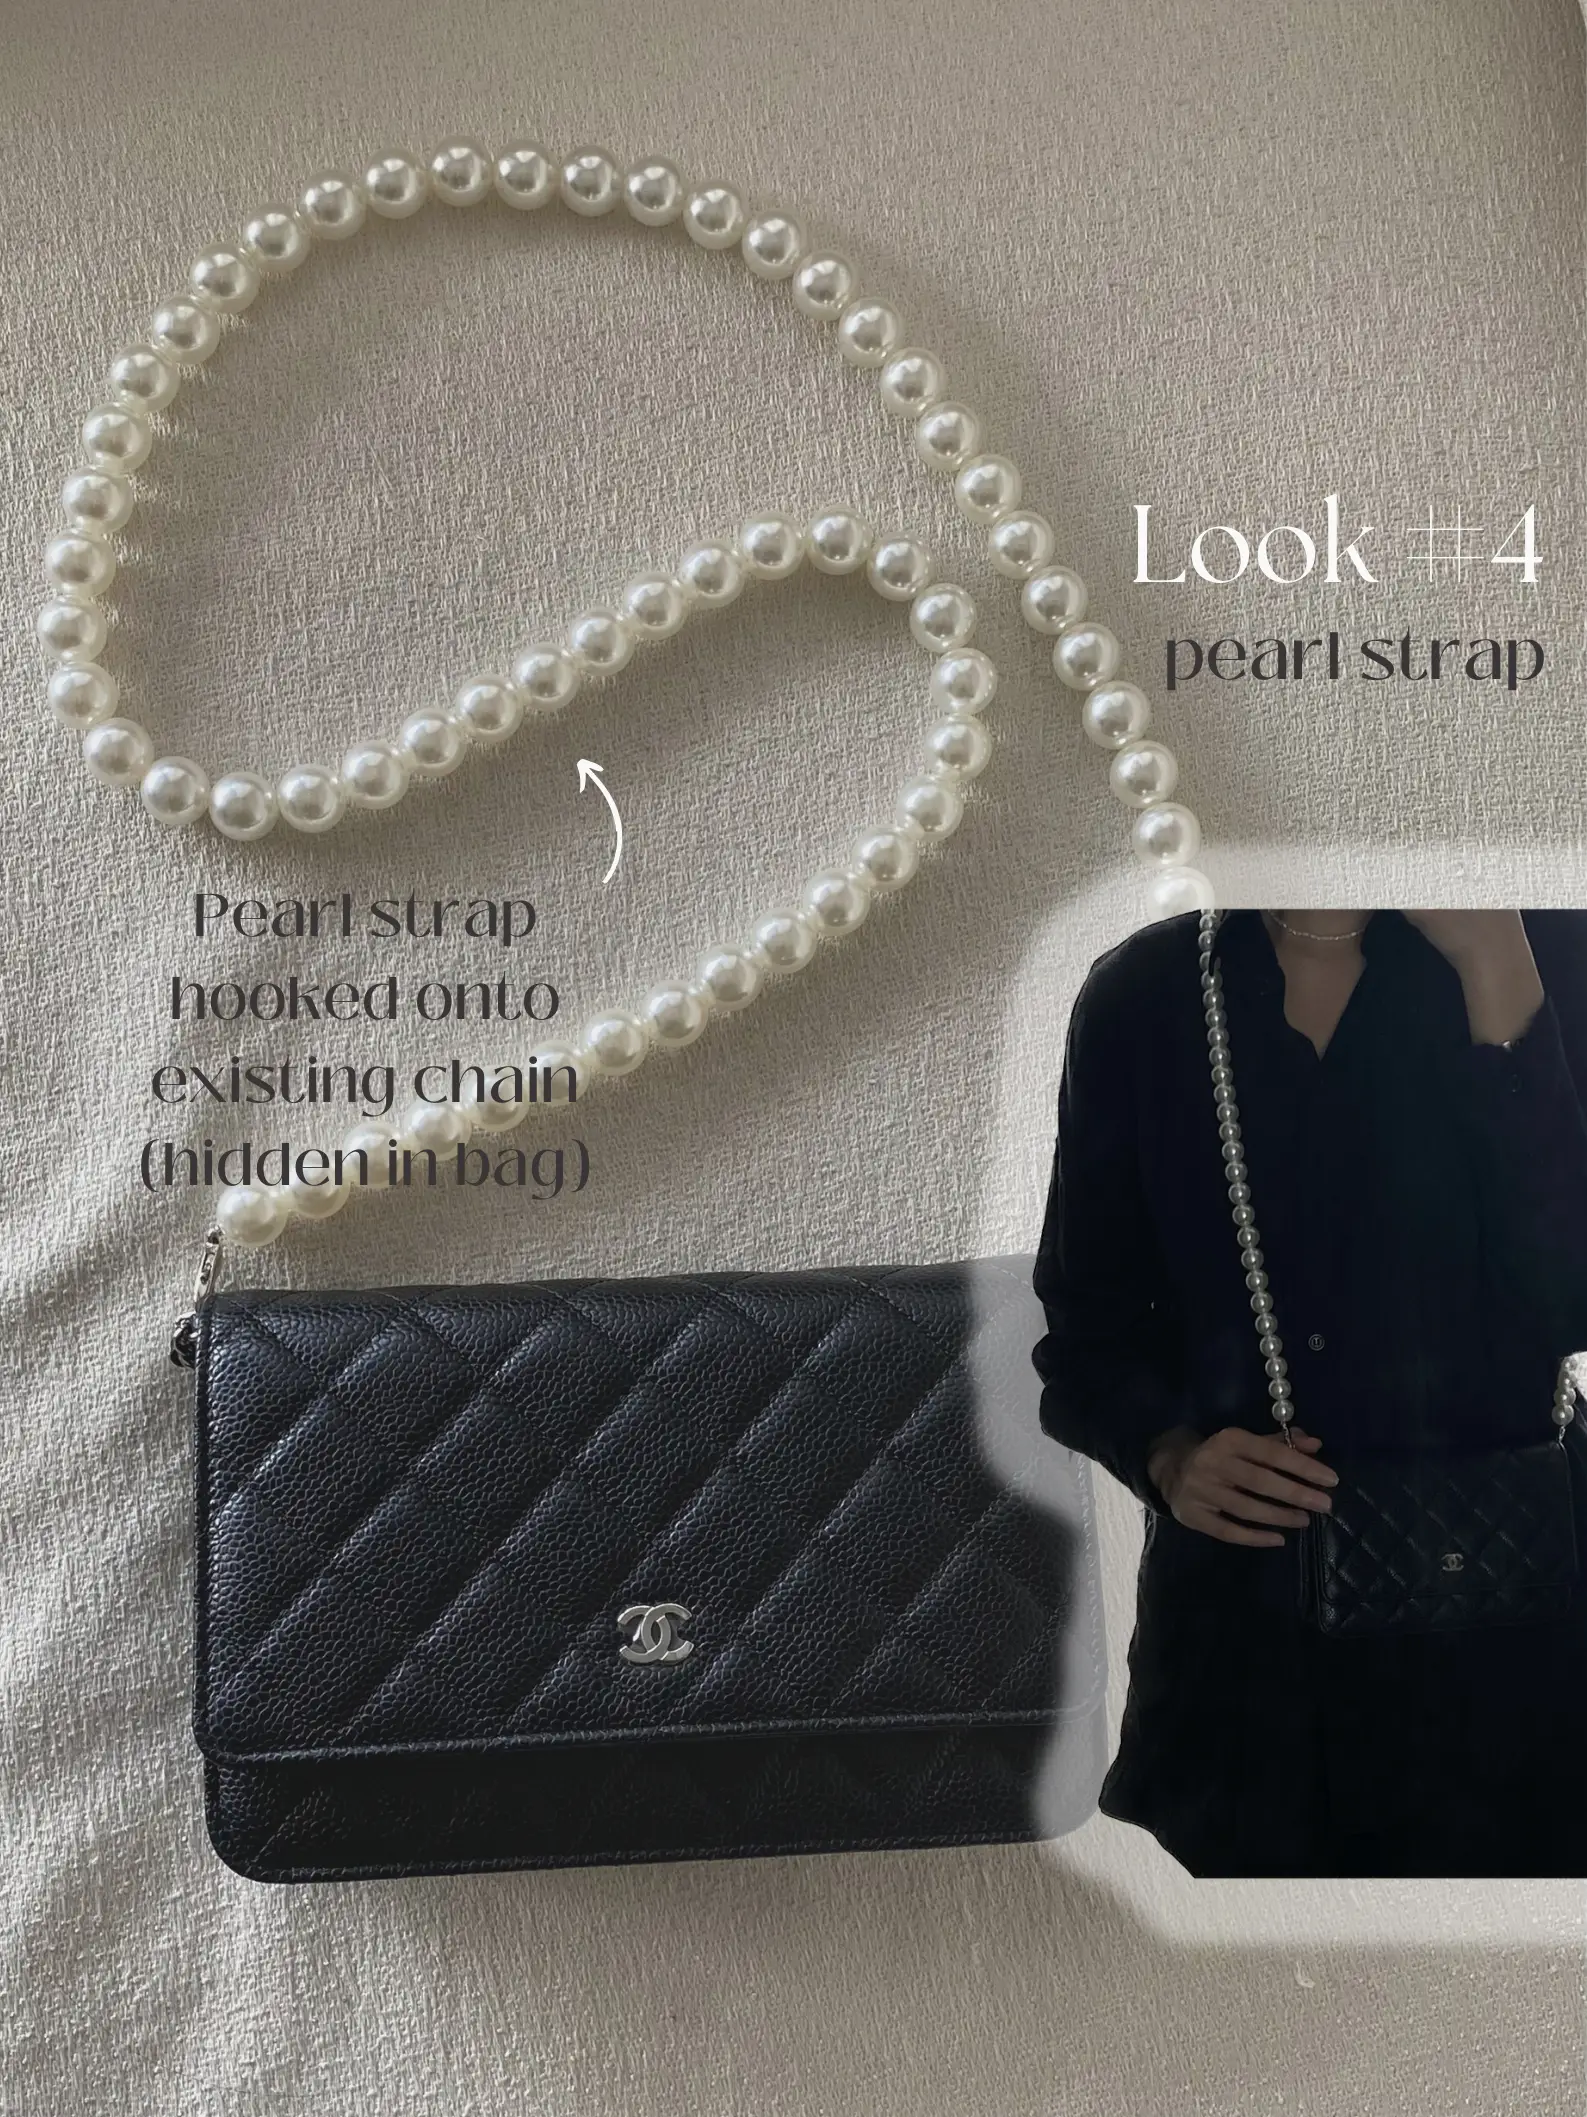 Pimp your Chanel WOC / bags with these accessories